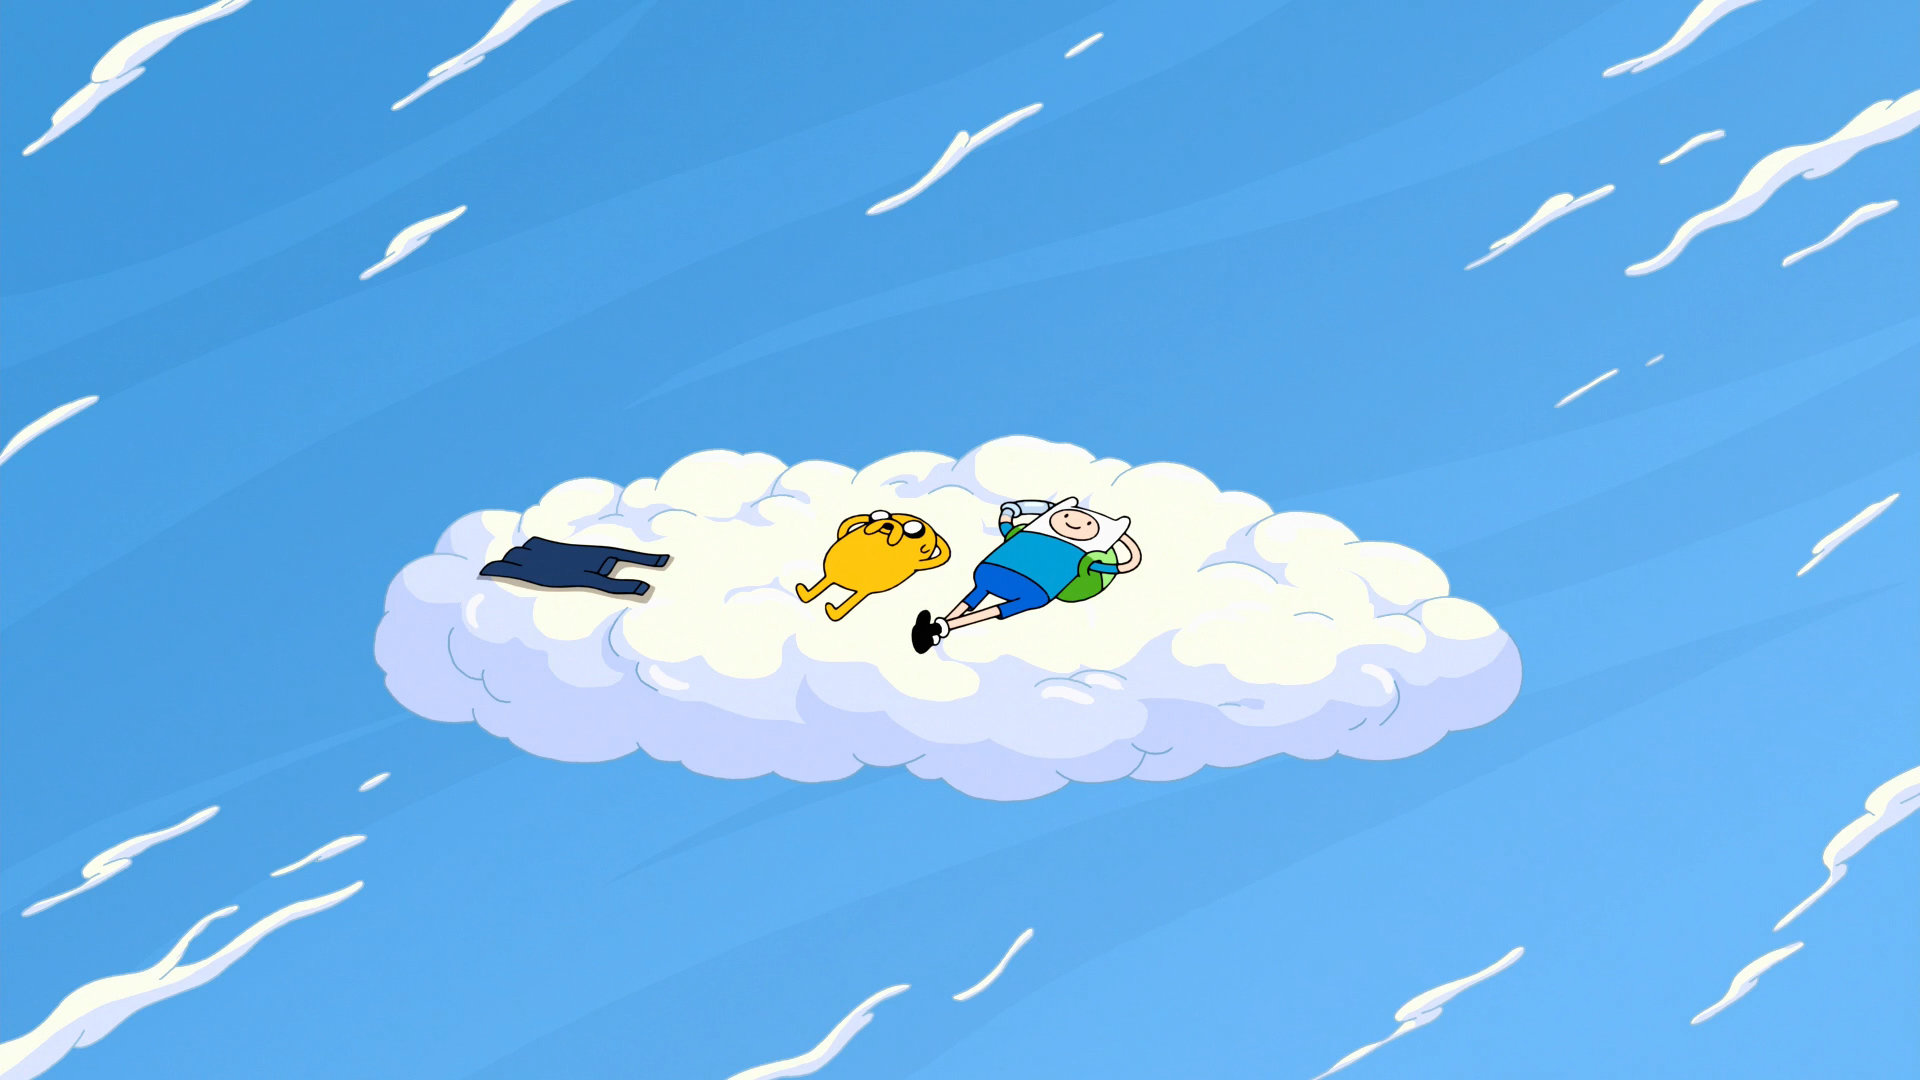 Can Some One Remove Finn And Jake From This Background Cloudy